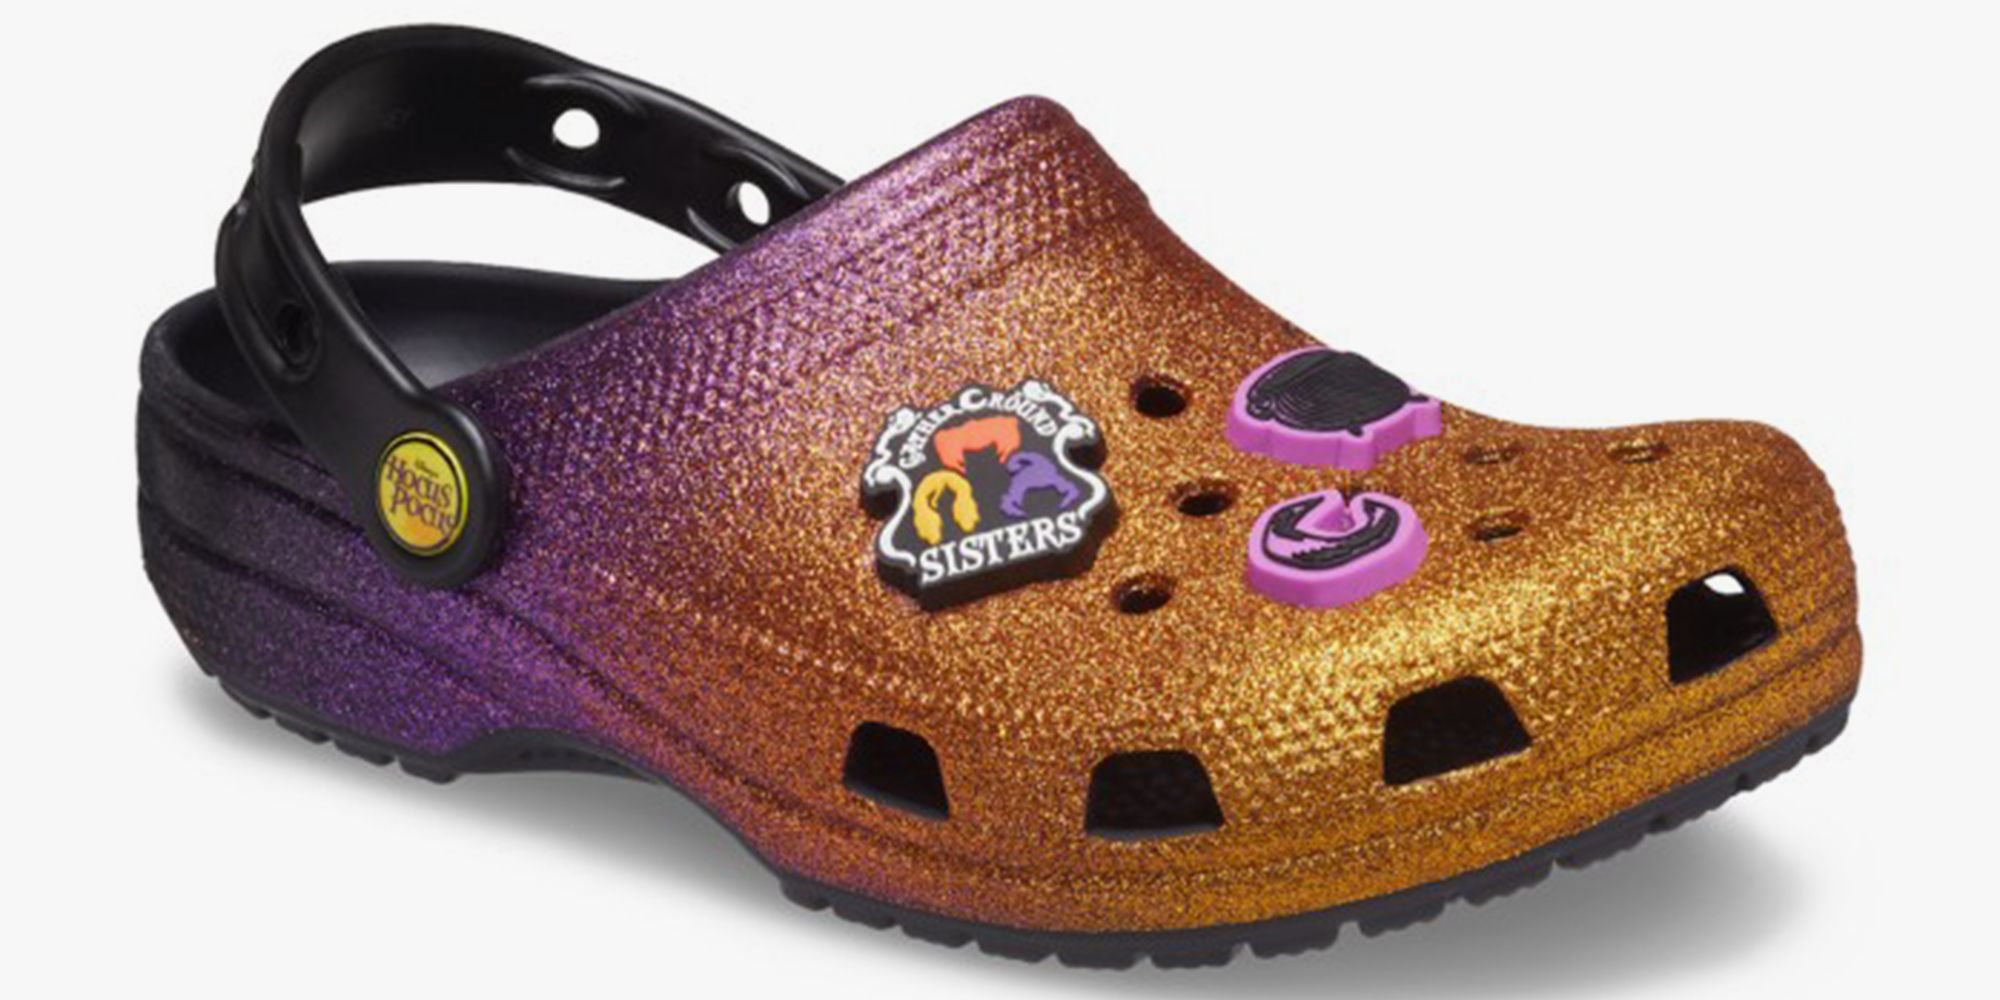 dragt dome propel You Can Get 'Hocus Pocus' Crocs That Are Complete With an Ombré Glitter  Design